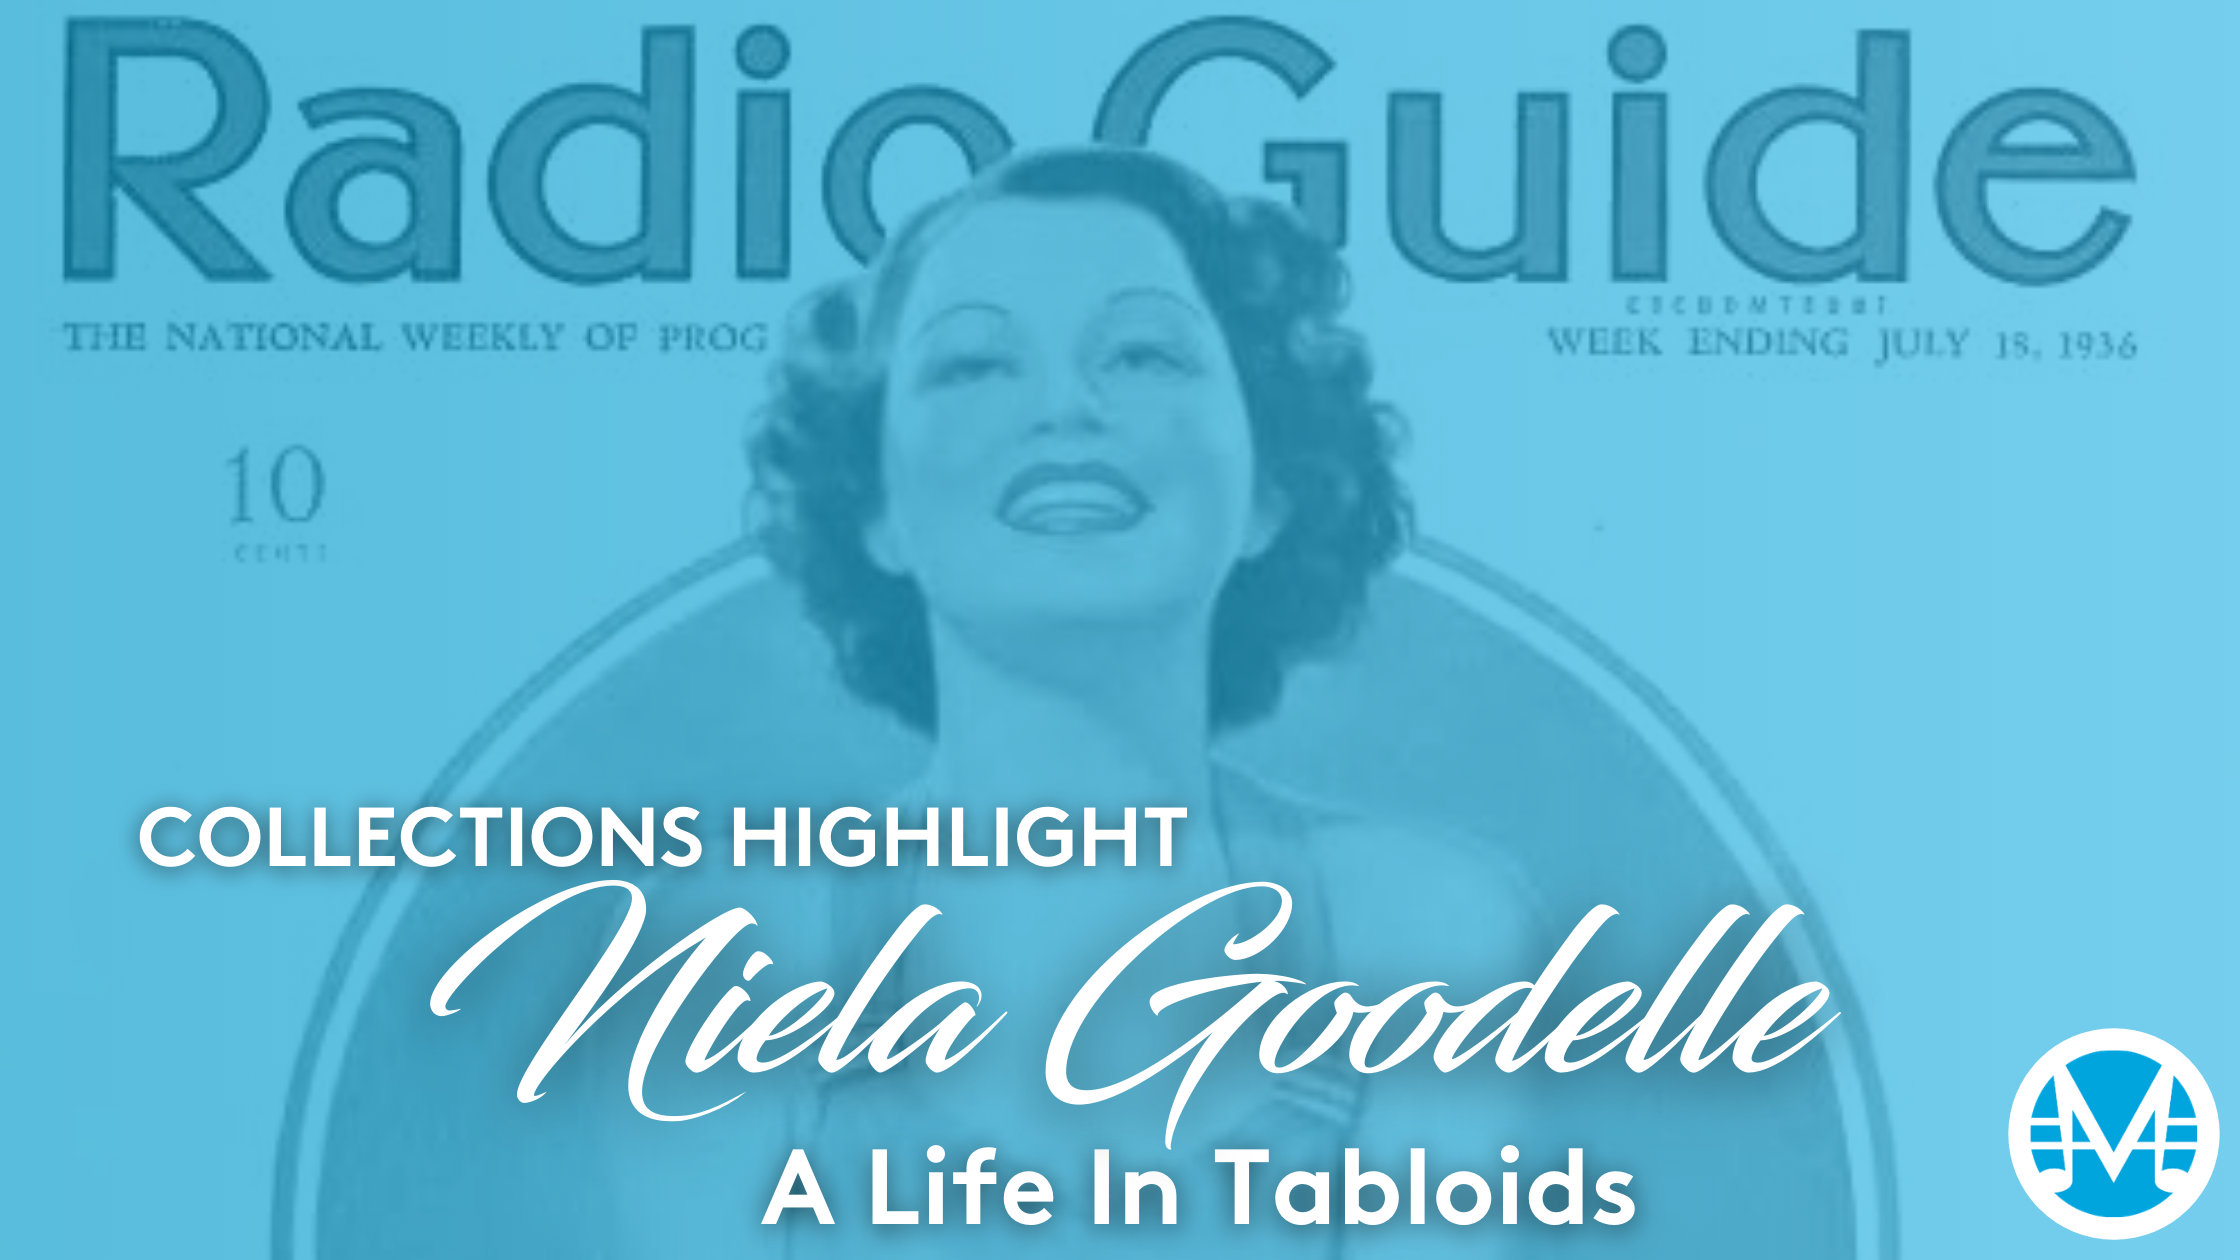 Collections Highlight Niela Goodelle A Life In Tabloids. Niela Goodelle looking up smiling on page of Radio Guide magazine.